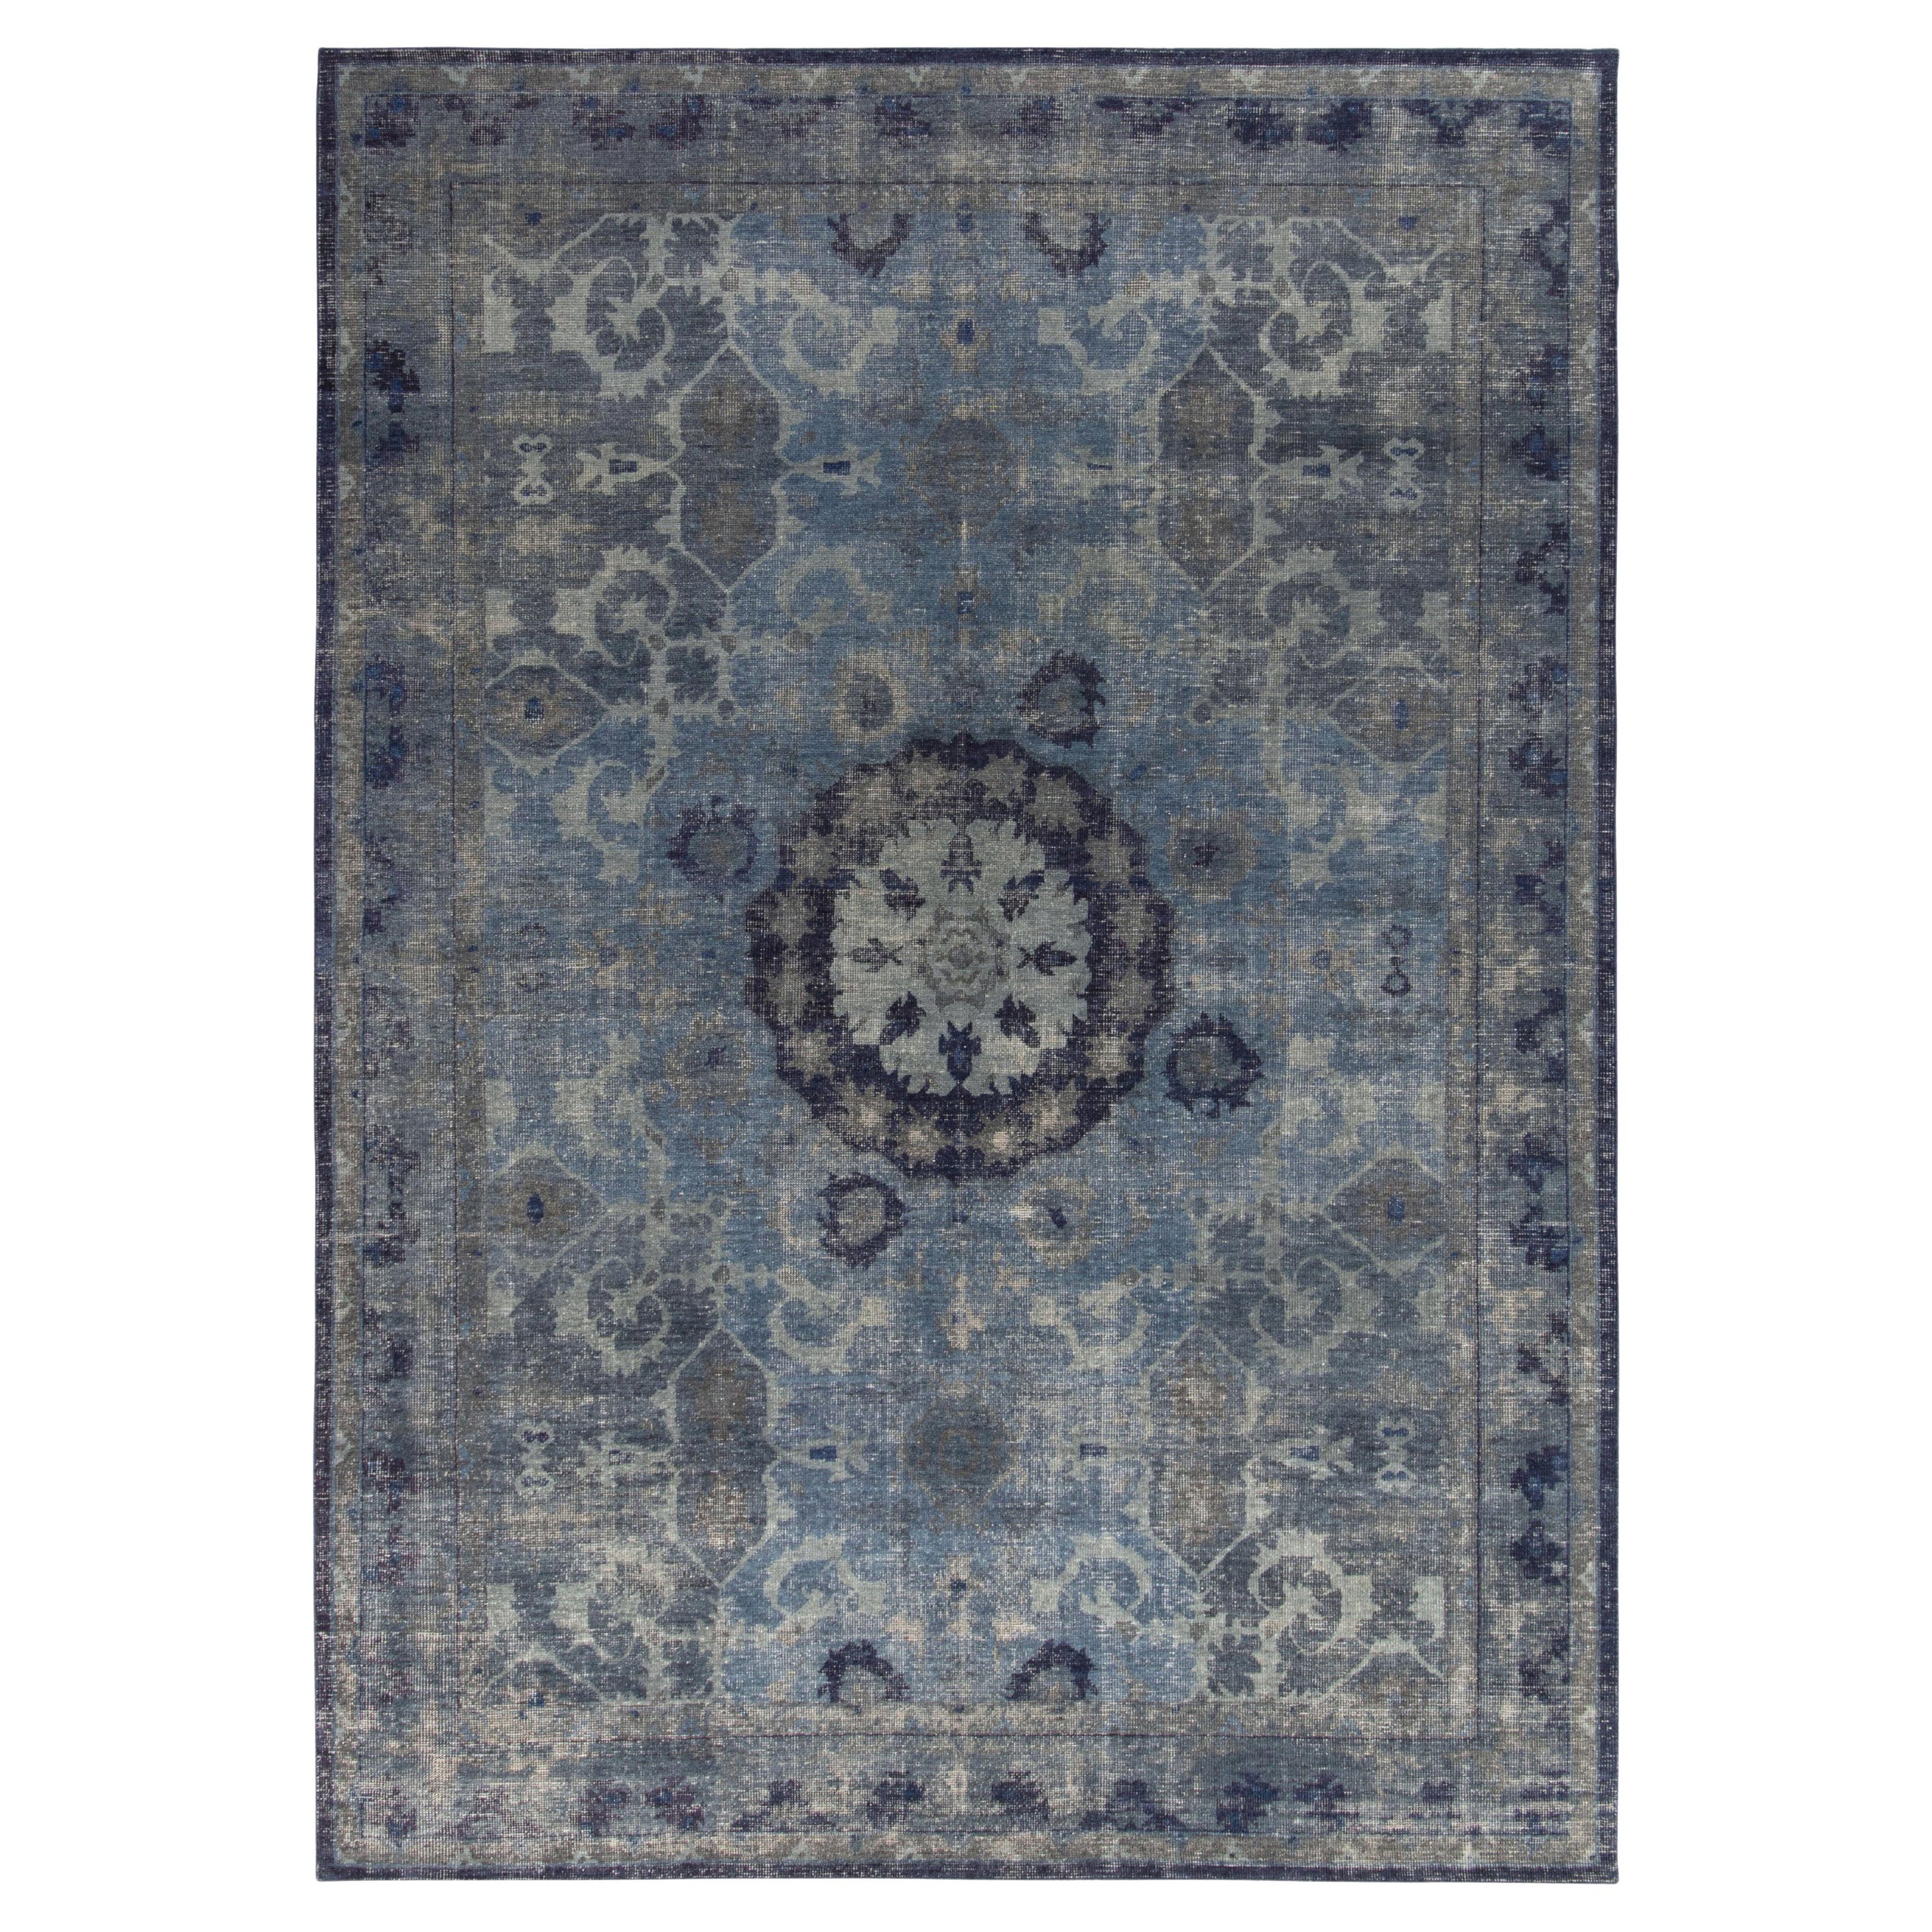 Rug & Kilim's Distressed Transitional Style Teppich in Blau, Graues Medaillon-Muster im Angebot